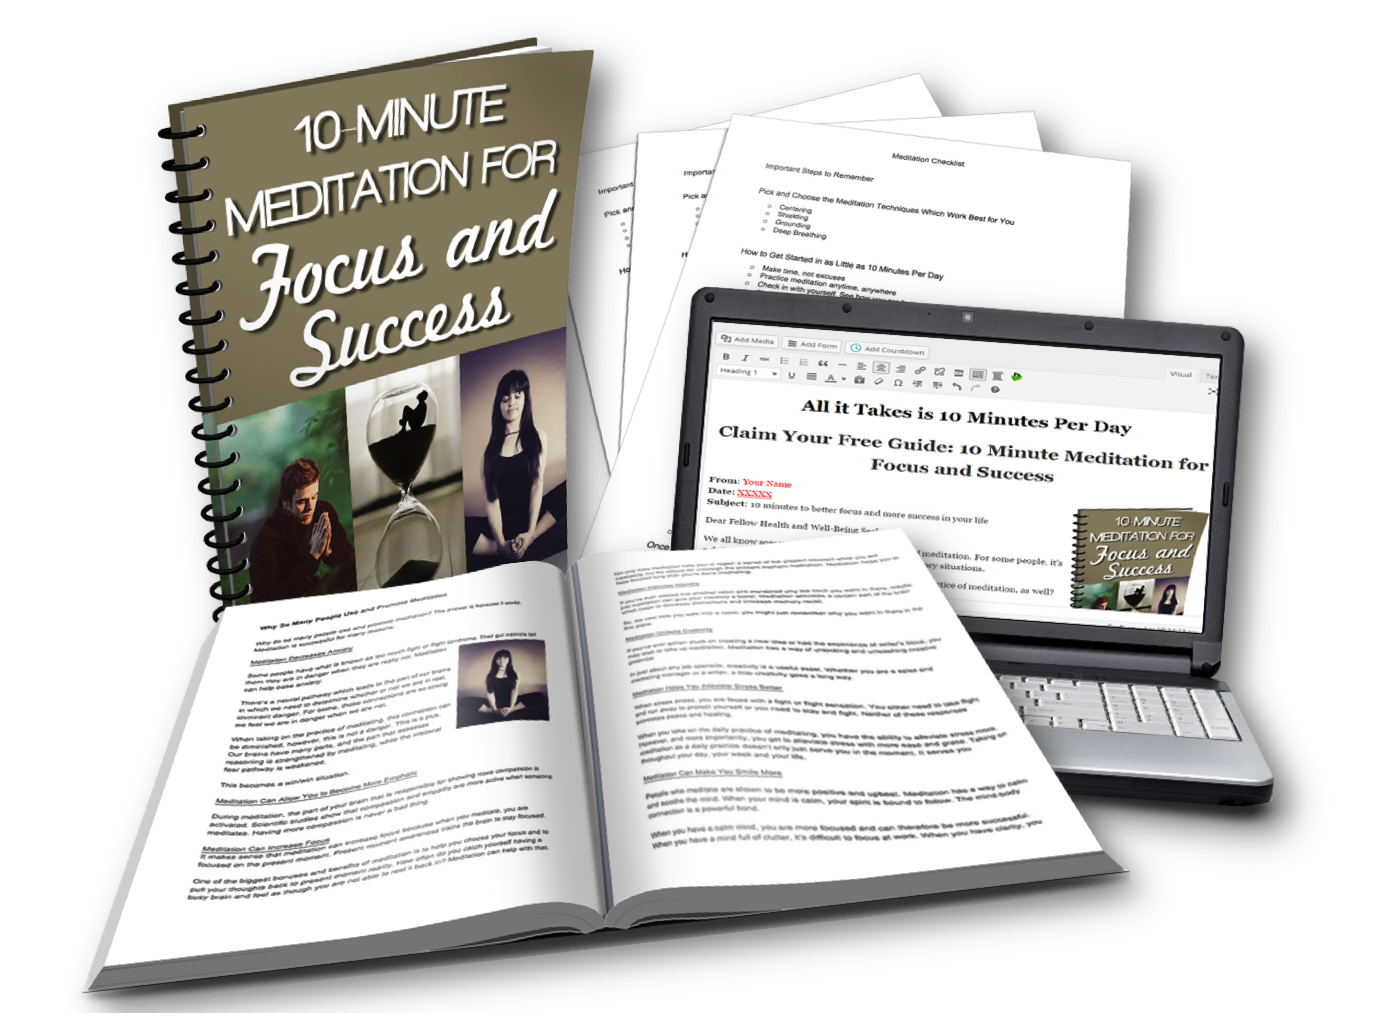 10-minute meditation for focus and success mockup marketing image